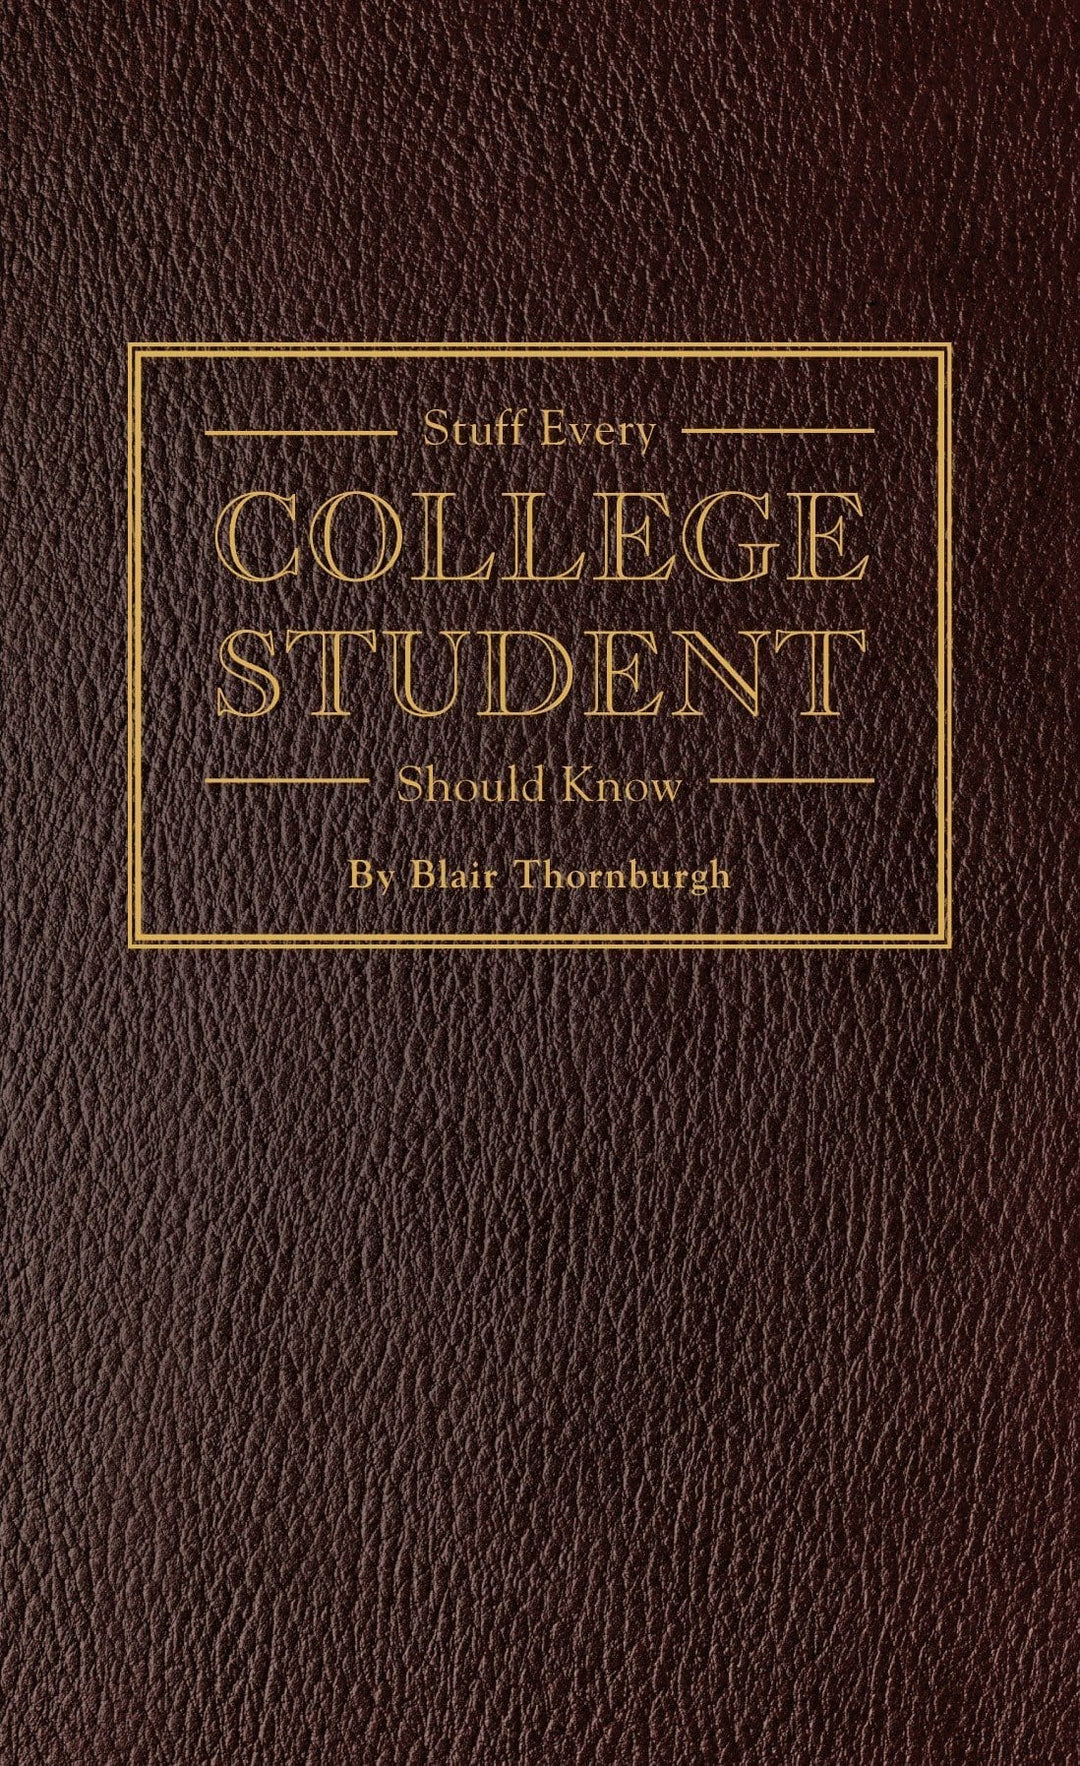 Penguin Random House Book Stuff Every College Student Should Know